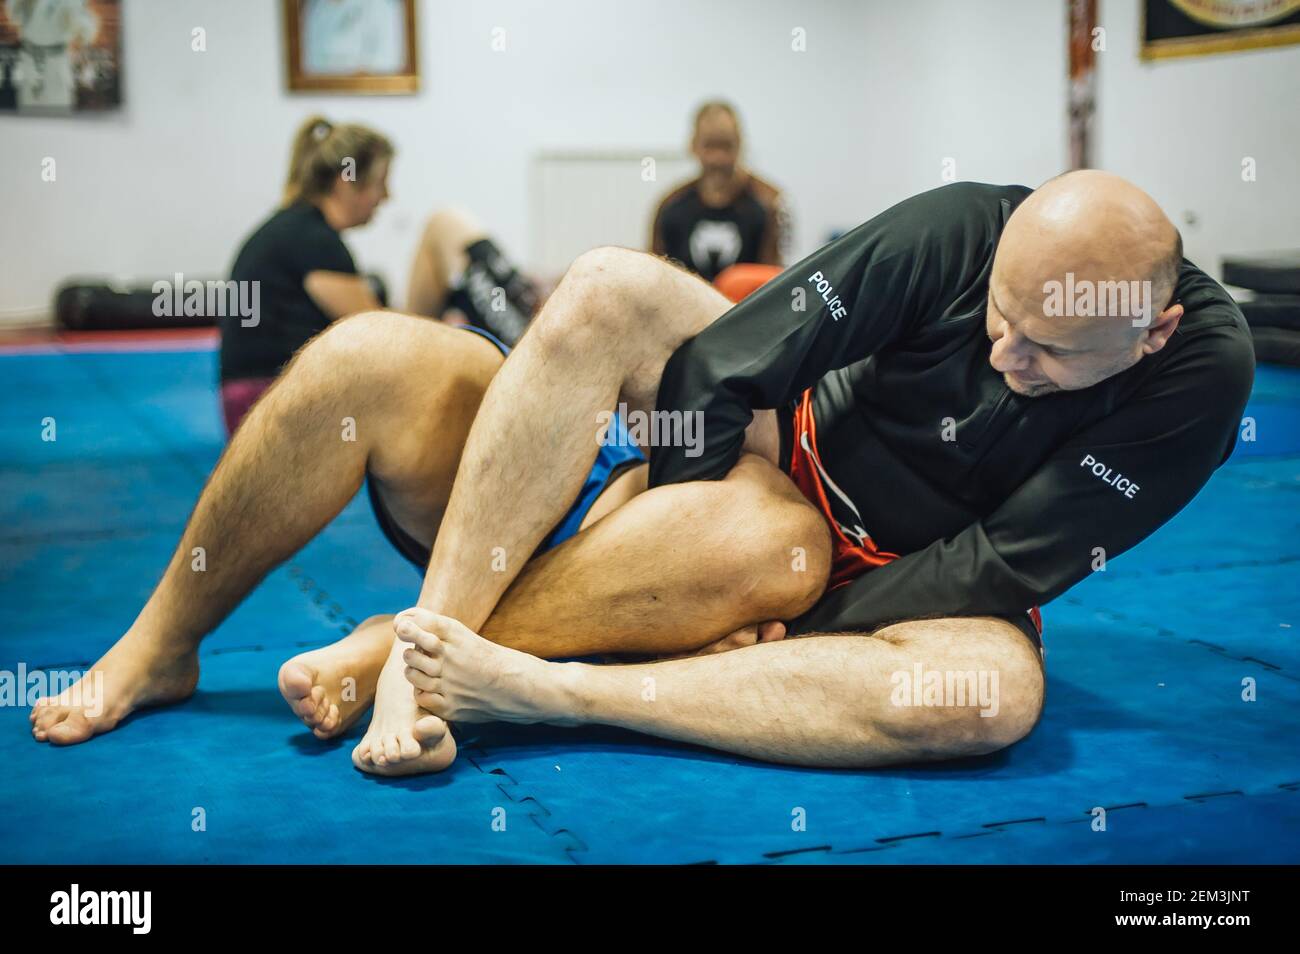 MMA Fighters in Choke Hold Training Stock Photo - Image of muscular,  armlock: 28019708